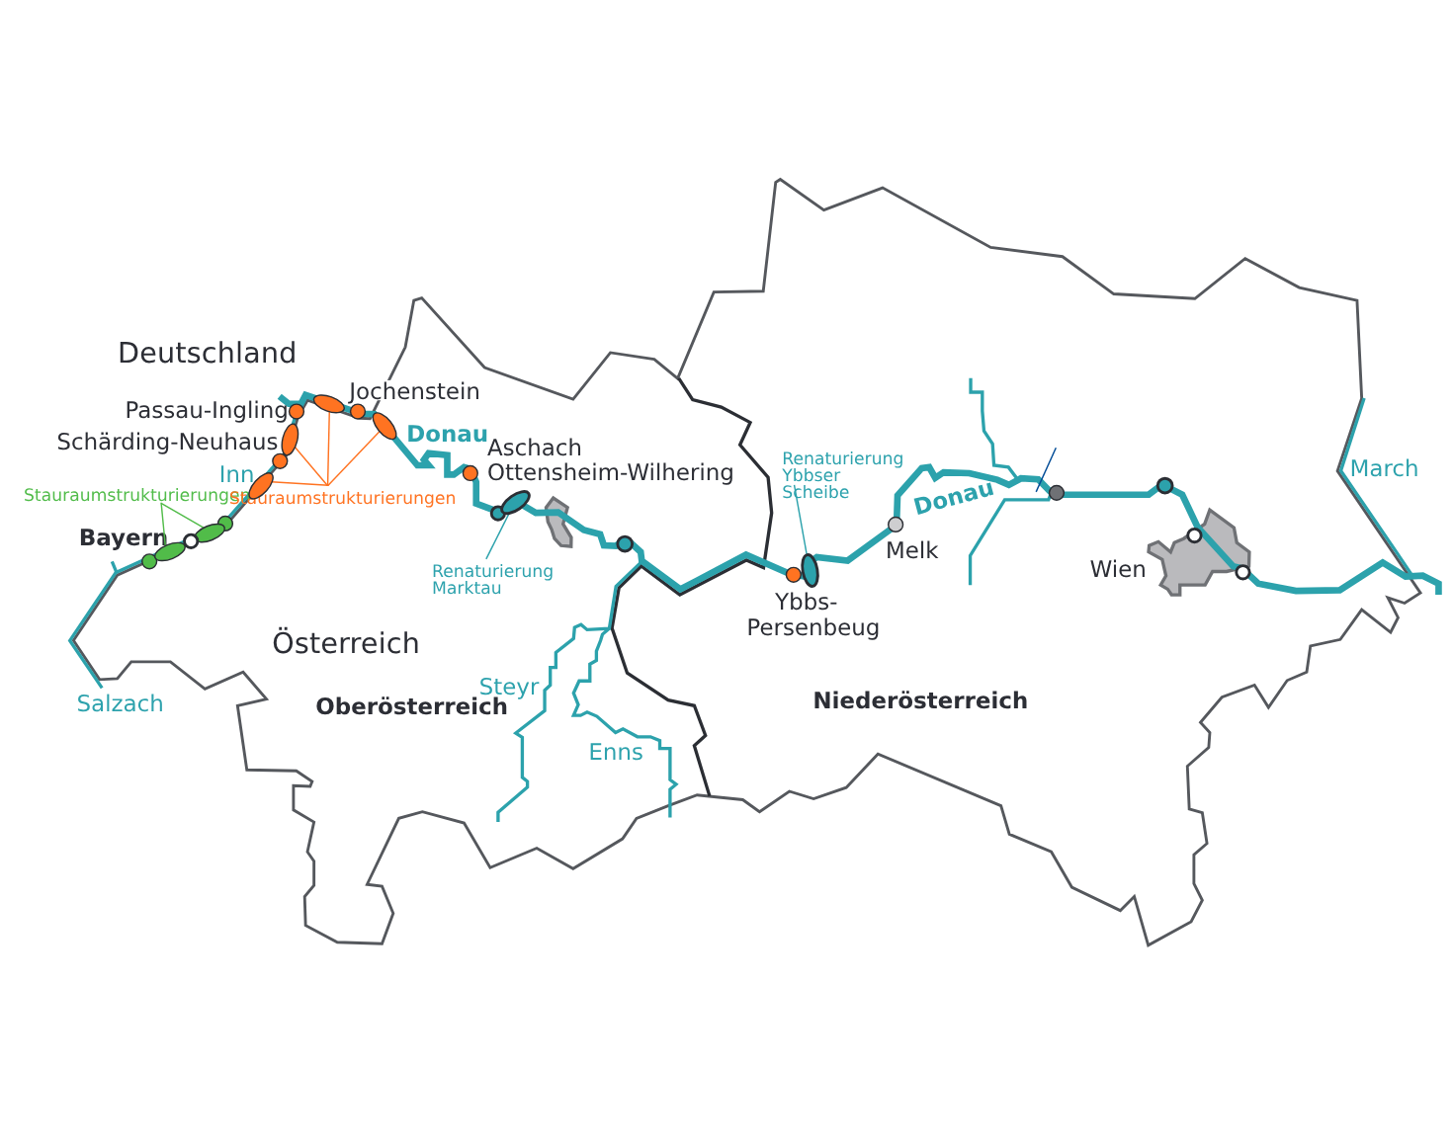 The images of a map on which the LIFE Blue Belt Danube Inn measures are marked. The Schärding-Neuhaus and Passau-Ingling power plants, where fish migration aids are planned, are shown on the Inn. For the Danube, the Jochenstein and Aschach Ottensheim-Wilhering power plants are shown first, where fish migration aids are also planned. Further downstream, the renaturalisation of the Marktau and the Ybbser Scheibe are planned. Finally, a fish migration aid is also to be built at the Ybbs-Persenbeug Danube power station.